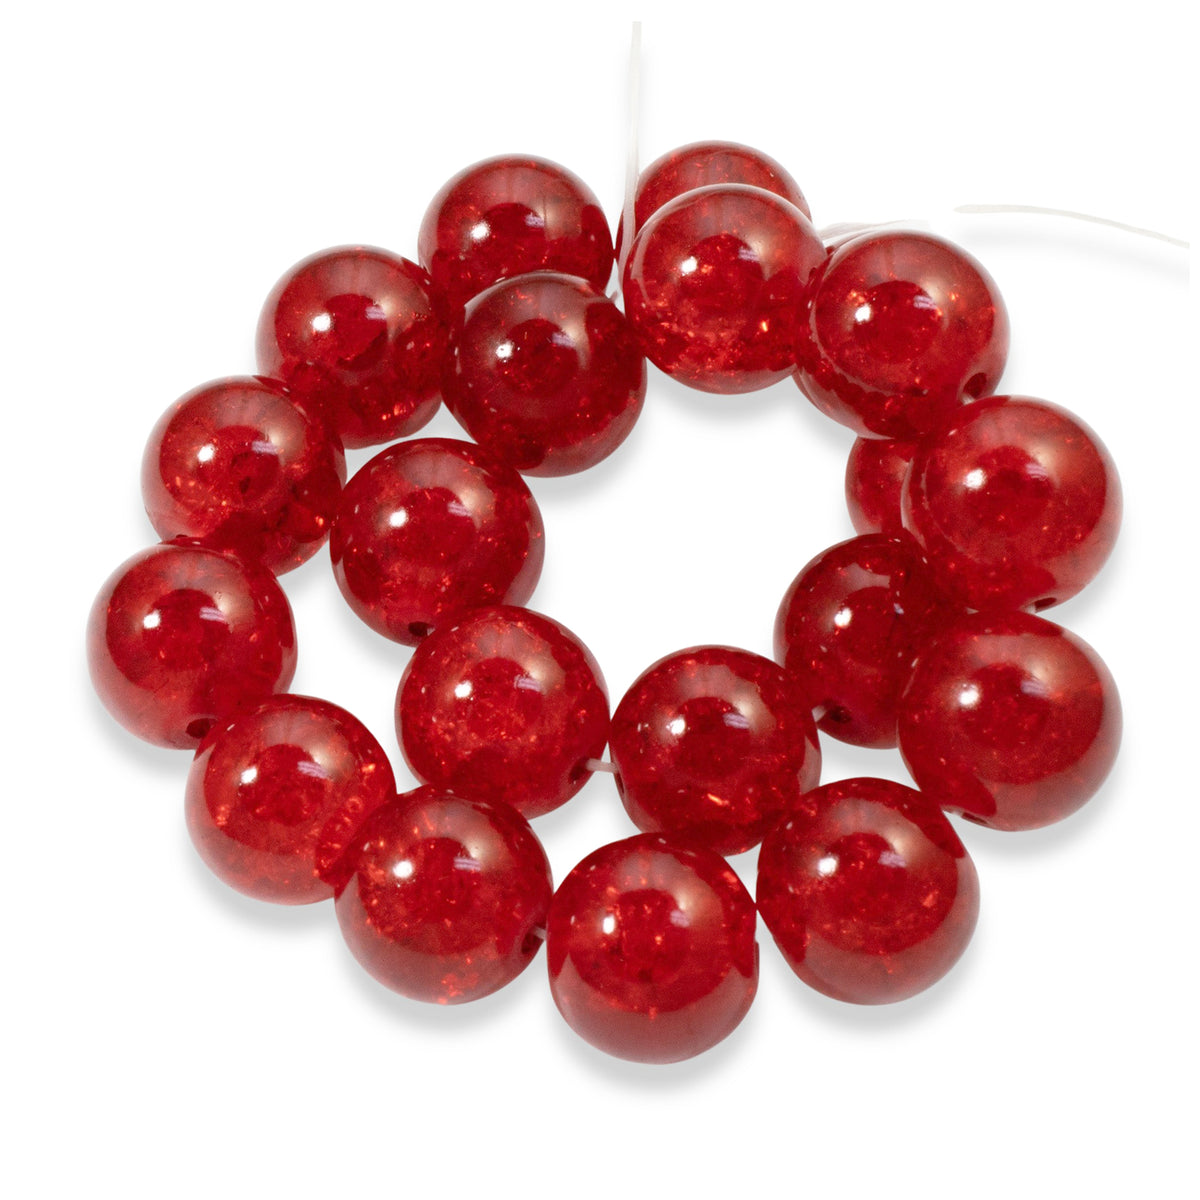 6mm Ruby Red Round Glass Crackle Beads | Hackberry Creek